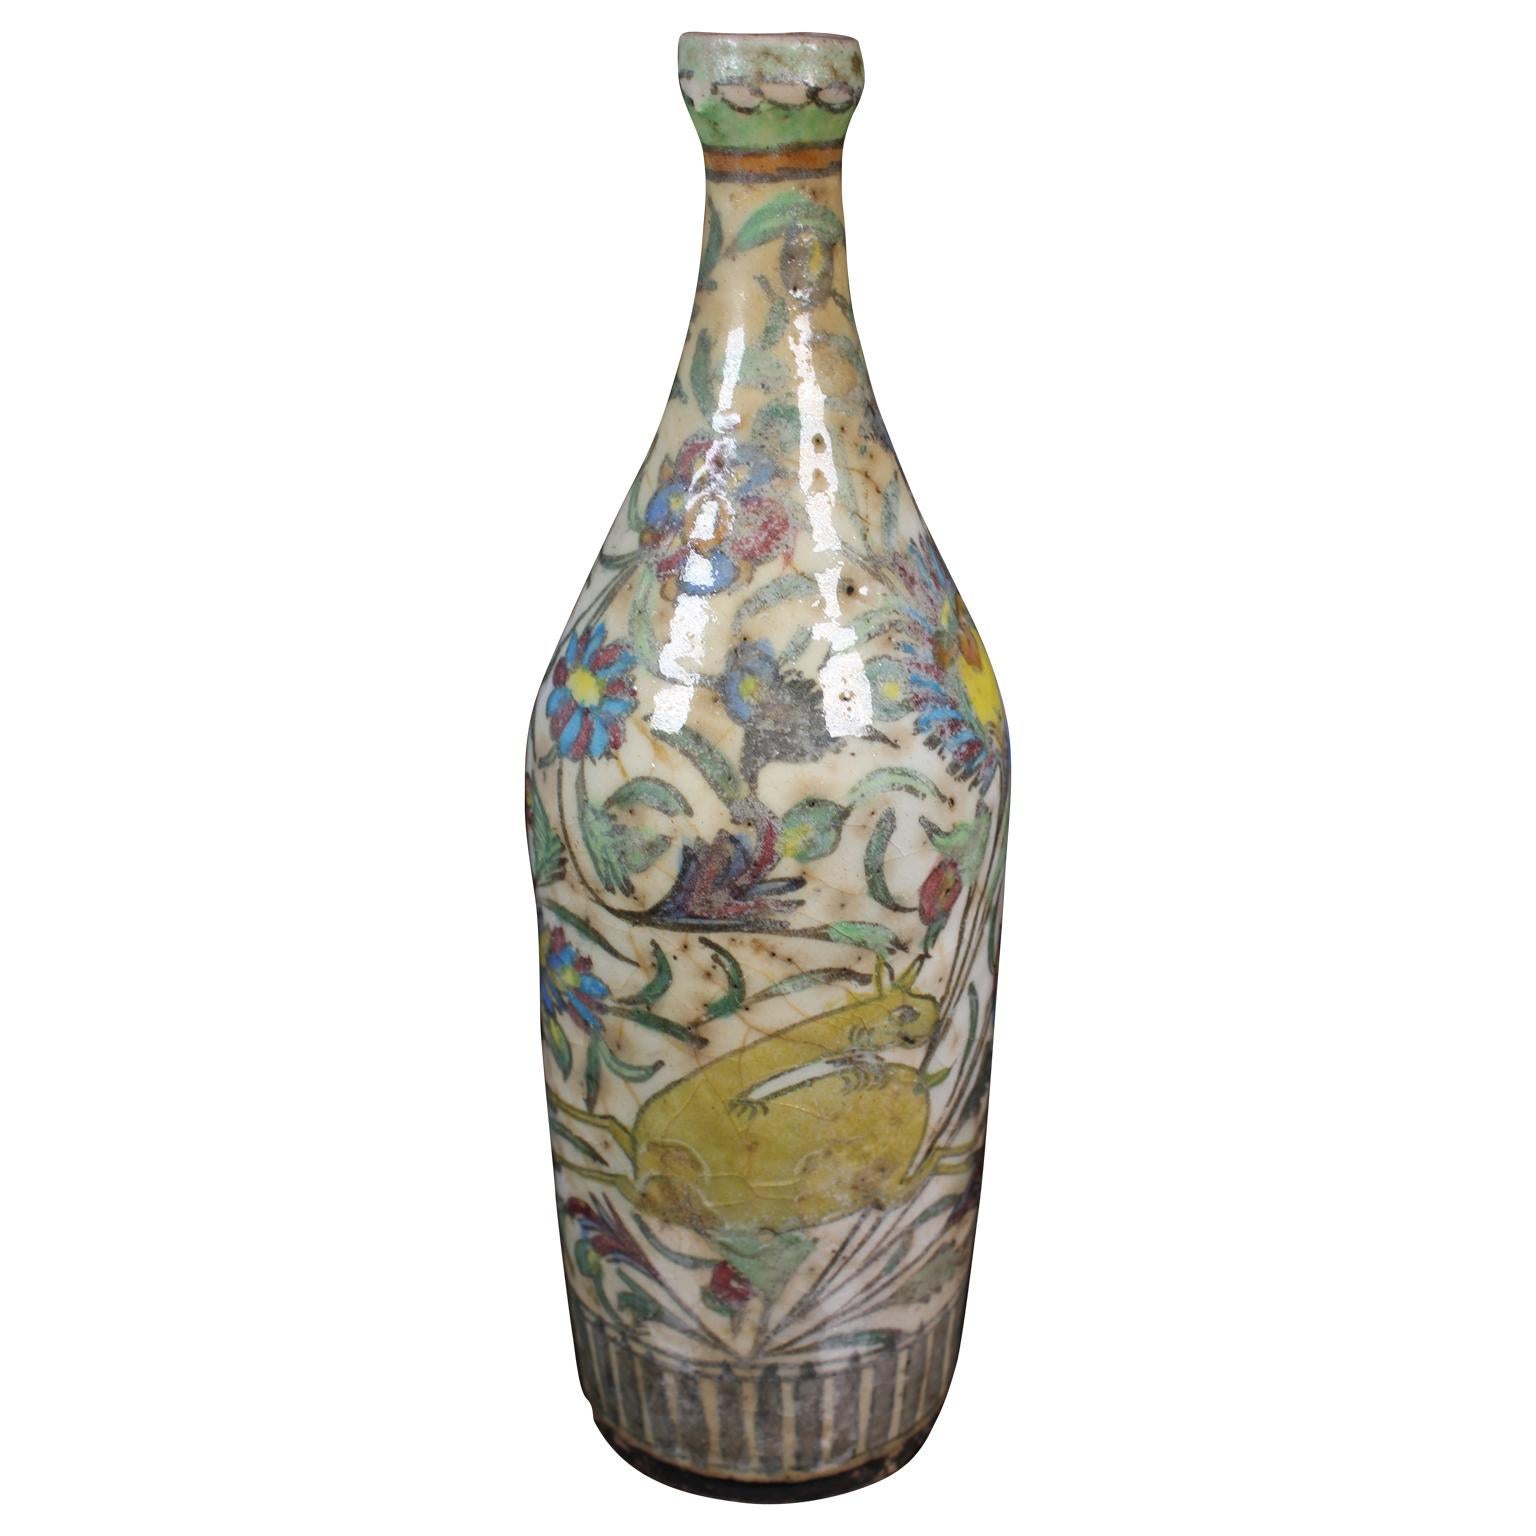 Persian wine bottle or vase that was repaired using a traditional Japanese method called kintsugi. The vase has hand painted flowers and animal details. It is an tan color with greens, blues, and purples.